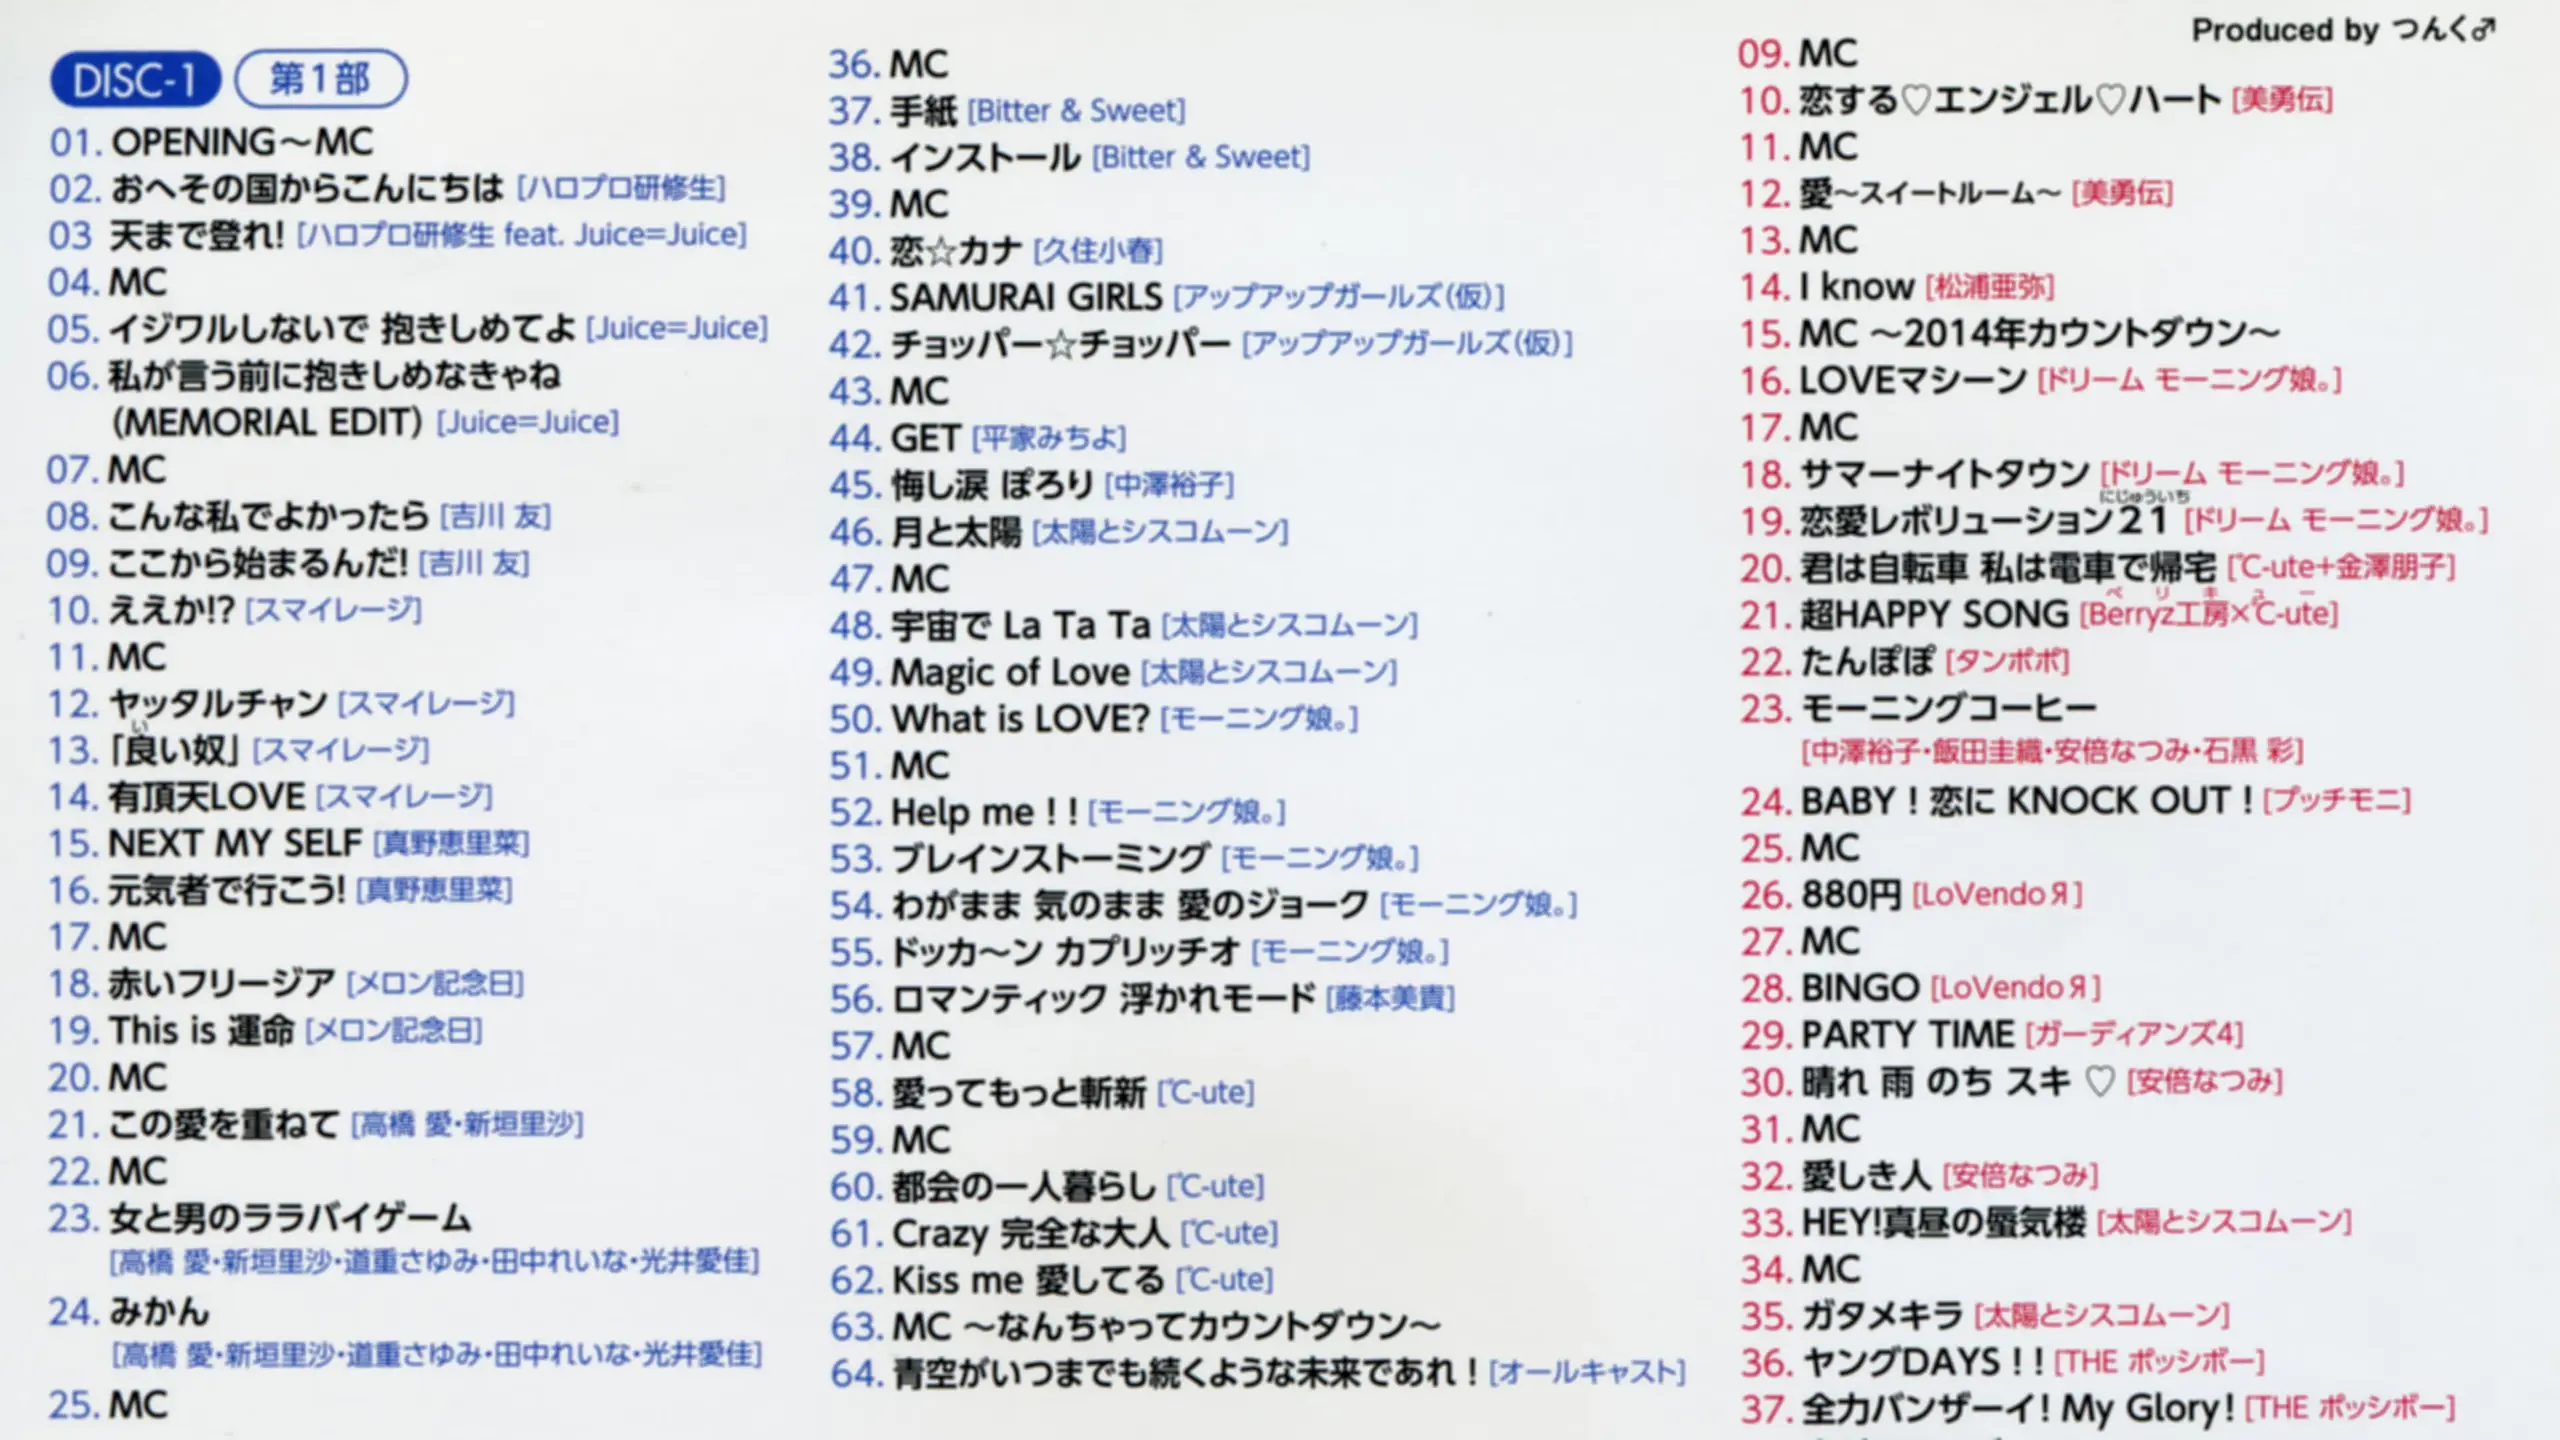 Hello! Project 2013 COUNTDOWN PARTY 2013-2014 ~GOODBYE & HELLO!~